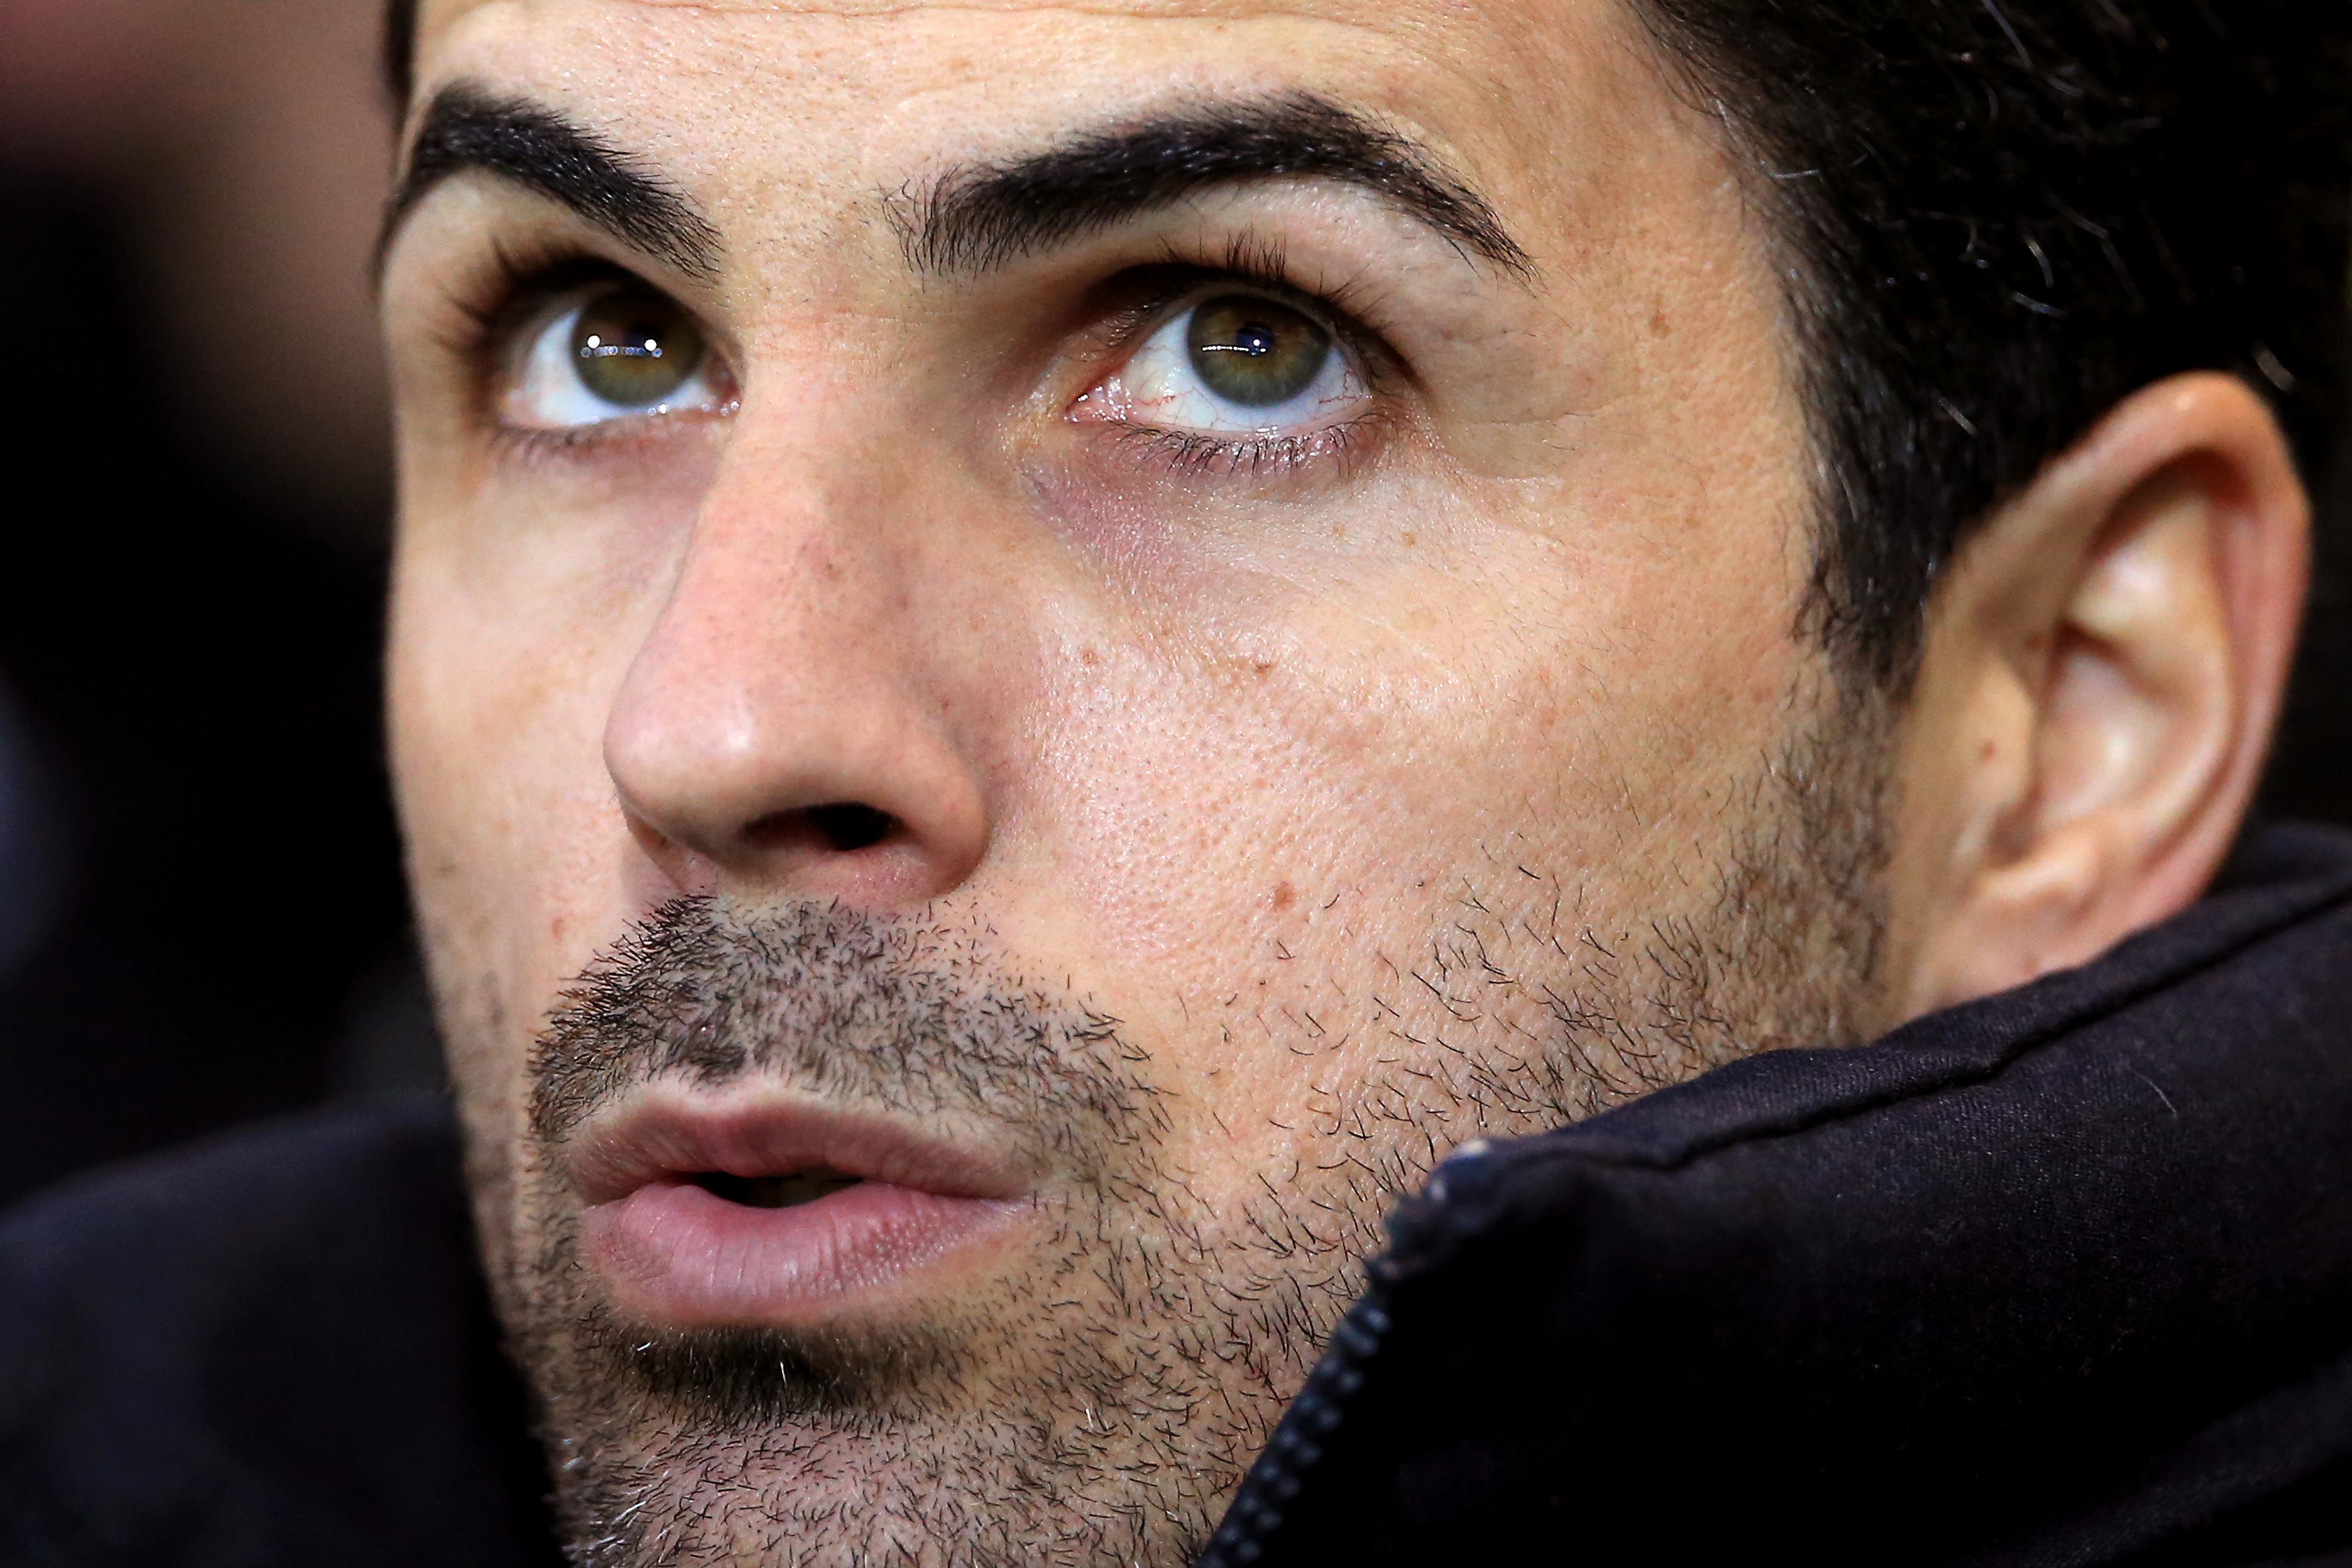 Arteta is still expected to do press duties ahead of the game on Thursday